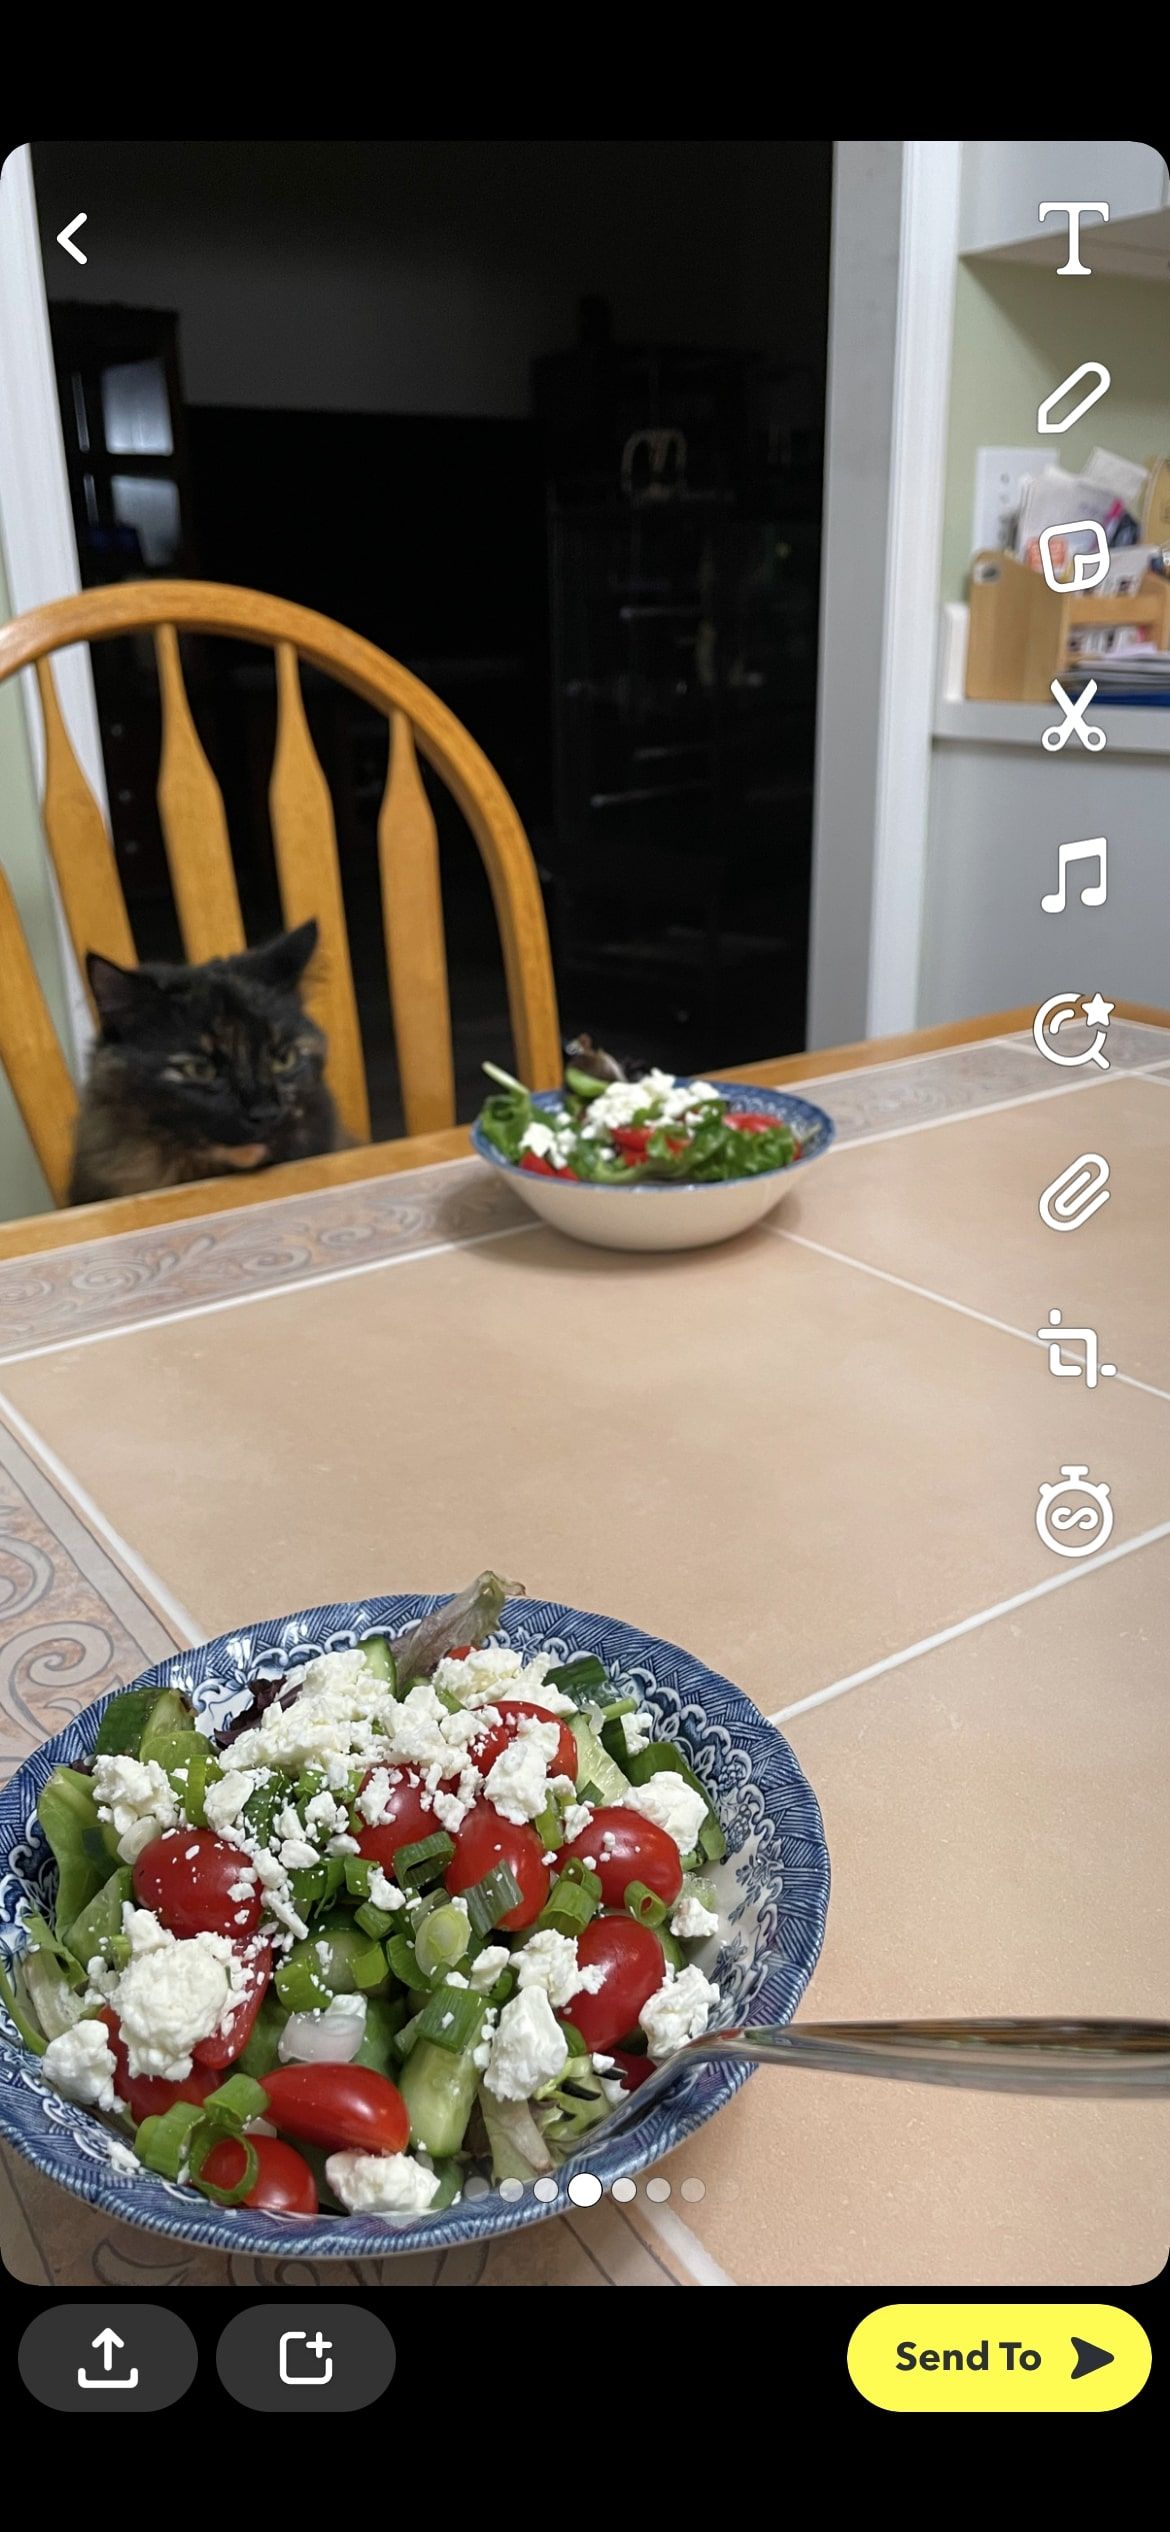 Screenshot of cat sitting at table within Snapchat